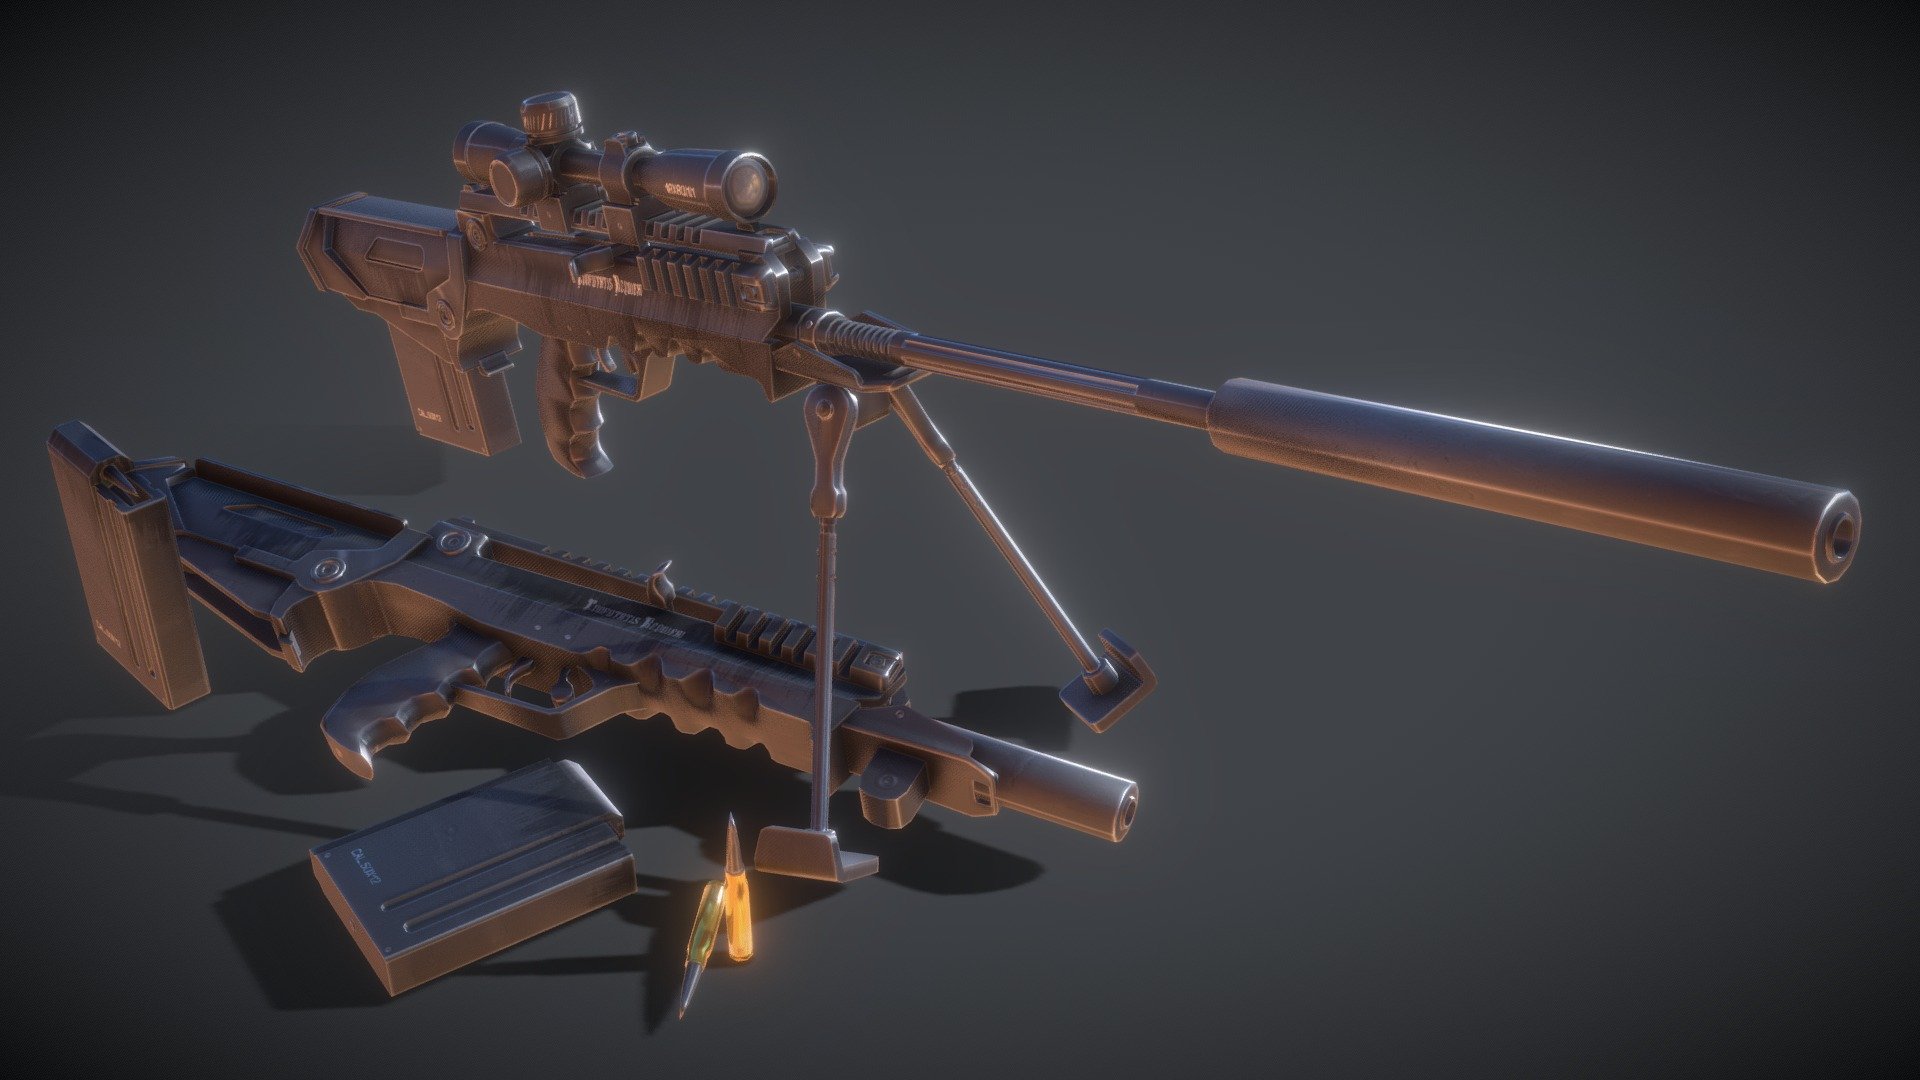 The Confutatis Requiem .50  is a french assault rifle used in the French Army form 1950 to1980. An exotic weapon not really known but quite original and intersesting in its way of folding. 
- 3D Model close to the original but partially reinterpreted 
- Proportions are partially respected compared to the original weapon 
- Optimised for Game engine (Tested on Unity 3D) 
- Some parts are separated from the main model for a better 3D animation usecase.

Made with Cinema4D Textured with ArmorPaint

//////////////// Model informations ////////////////

Points : 11351
Polygons : 14567
Objects: 32 (bullets and mobile parts included)
One material made of 4 Textures (20482048 px) for all the model  (Albedo (base), Normal, Metal, Rough*) - Confutatis Requiem .50 - 3D model by Gwenaël Hervé (@Gwenael_Herve) 3d model